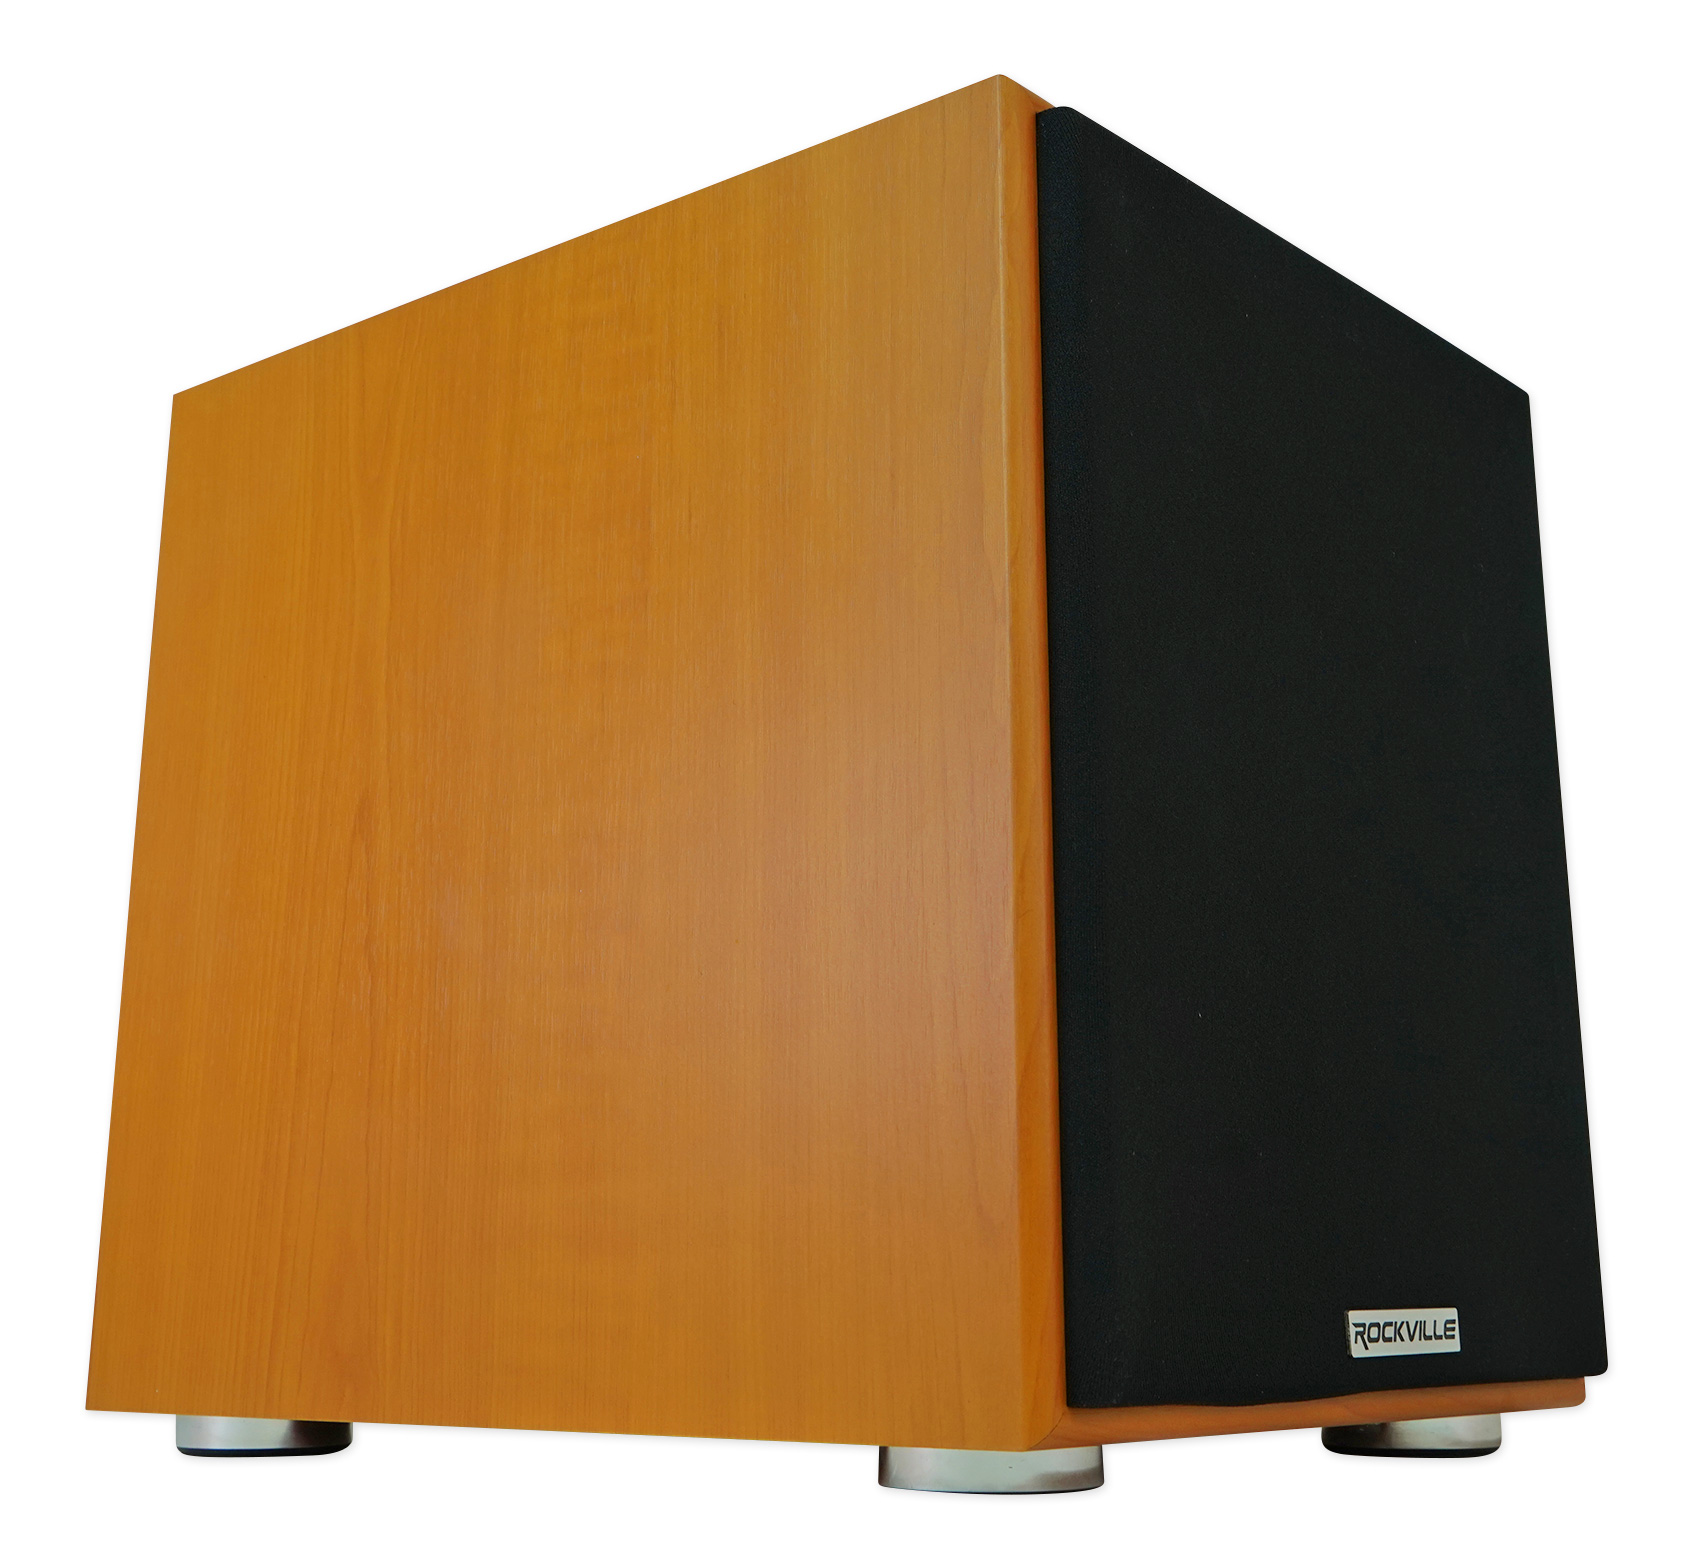 Rockville Rock Shaker 8" Classic Wood 400w Powered Home Theater Subwoofer Sub - image 3 of 10